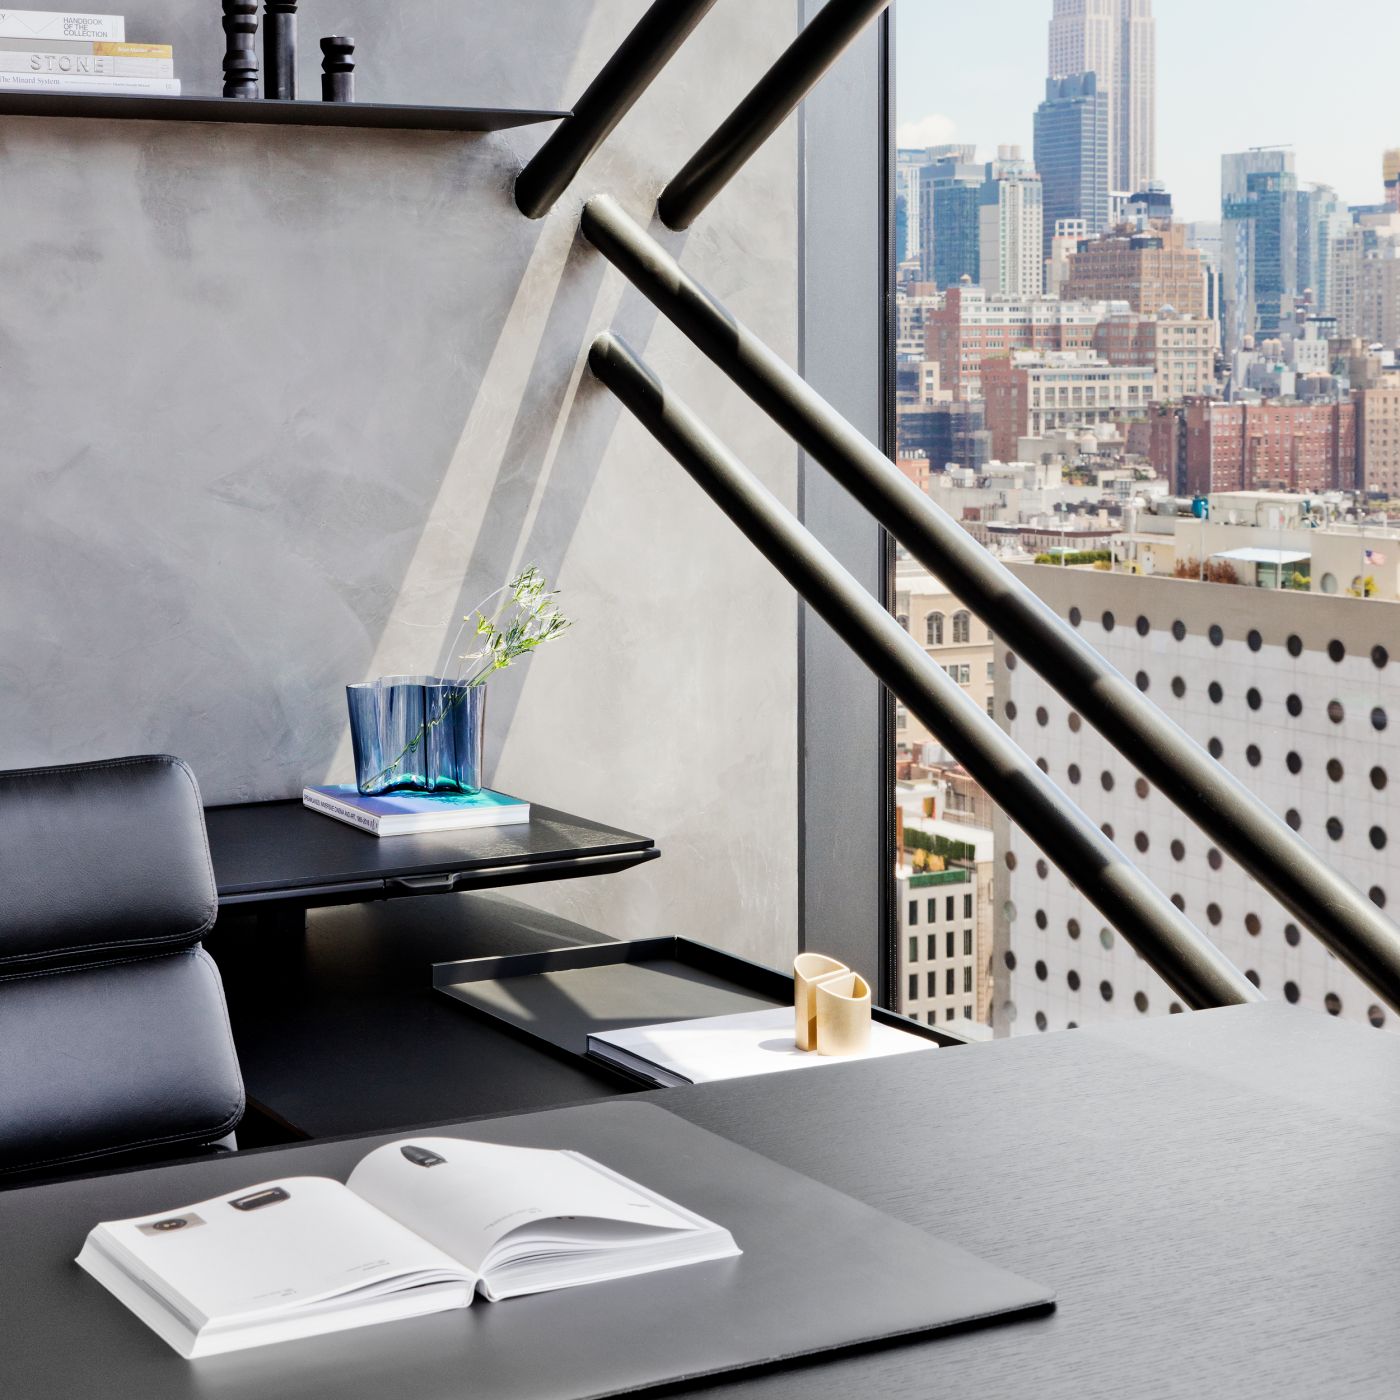 HALO OFFICE is ideal for this executive suite's rich luxurious palette.